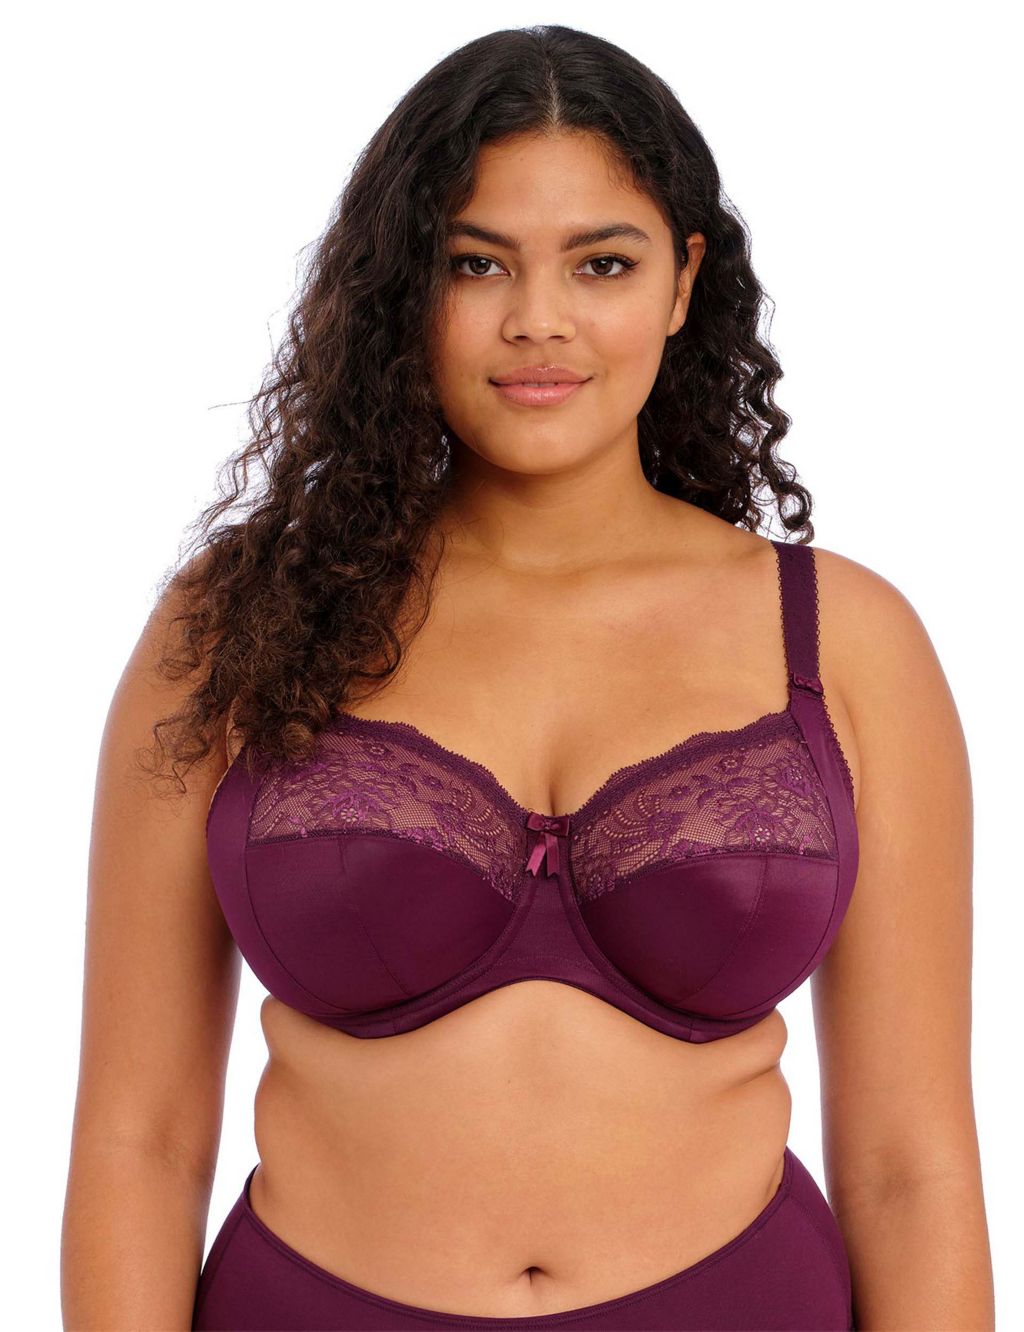 Morgan Lace Wired Side Support Bra image 1